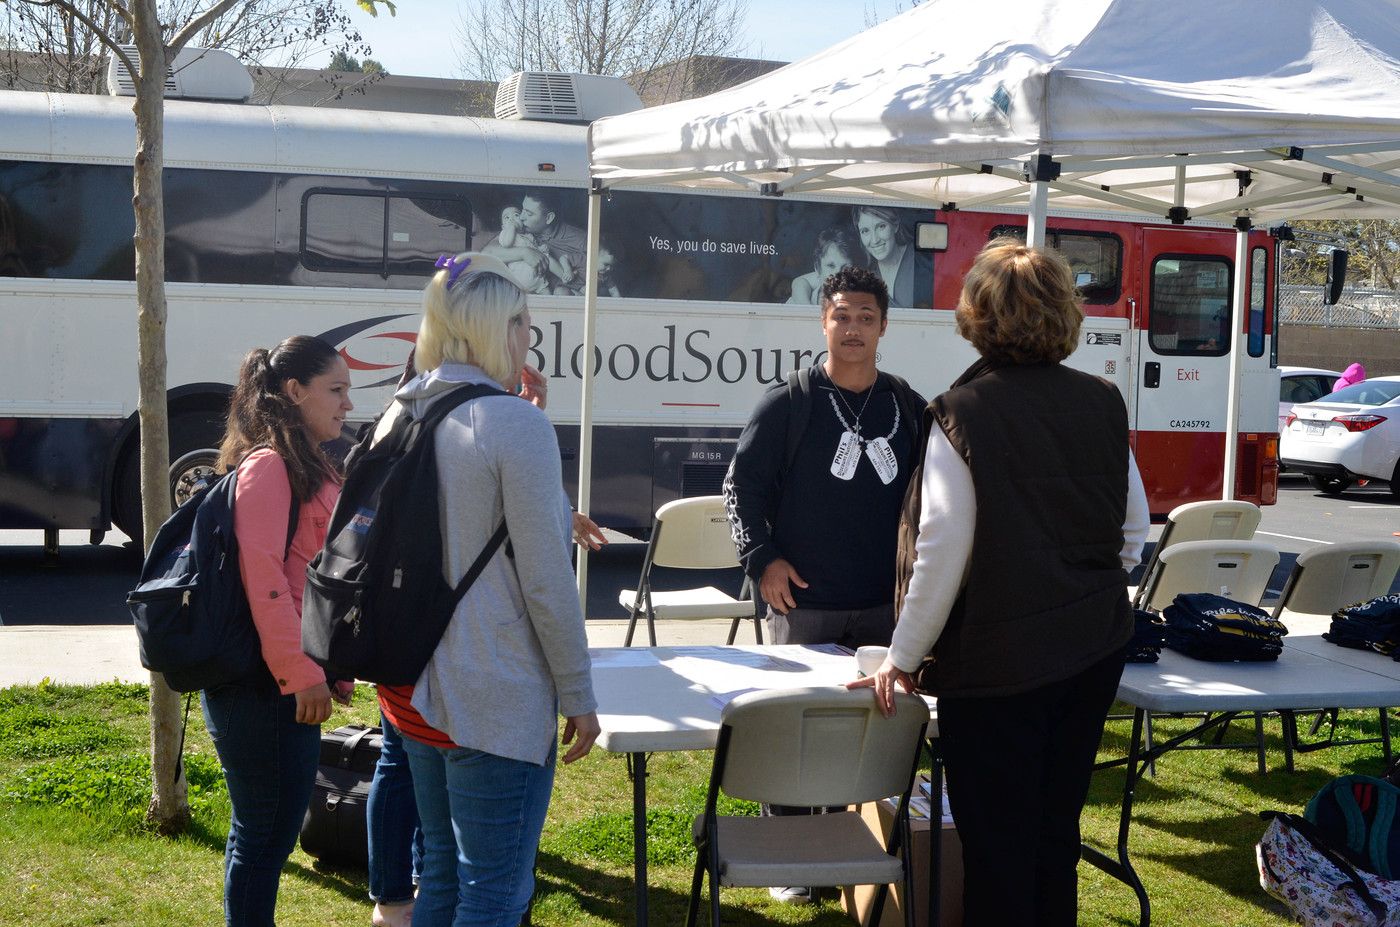 In front of the Blood Souce bus, students are talking to a Blood Souce volunteer about the process to donate blood. March 15, 2016. Christopher Williams, Staff Photographer. |chrisWexpress@gmail.com